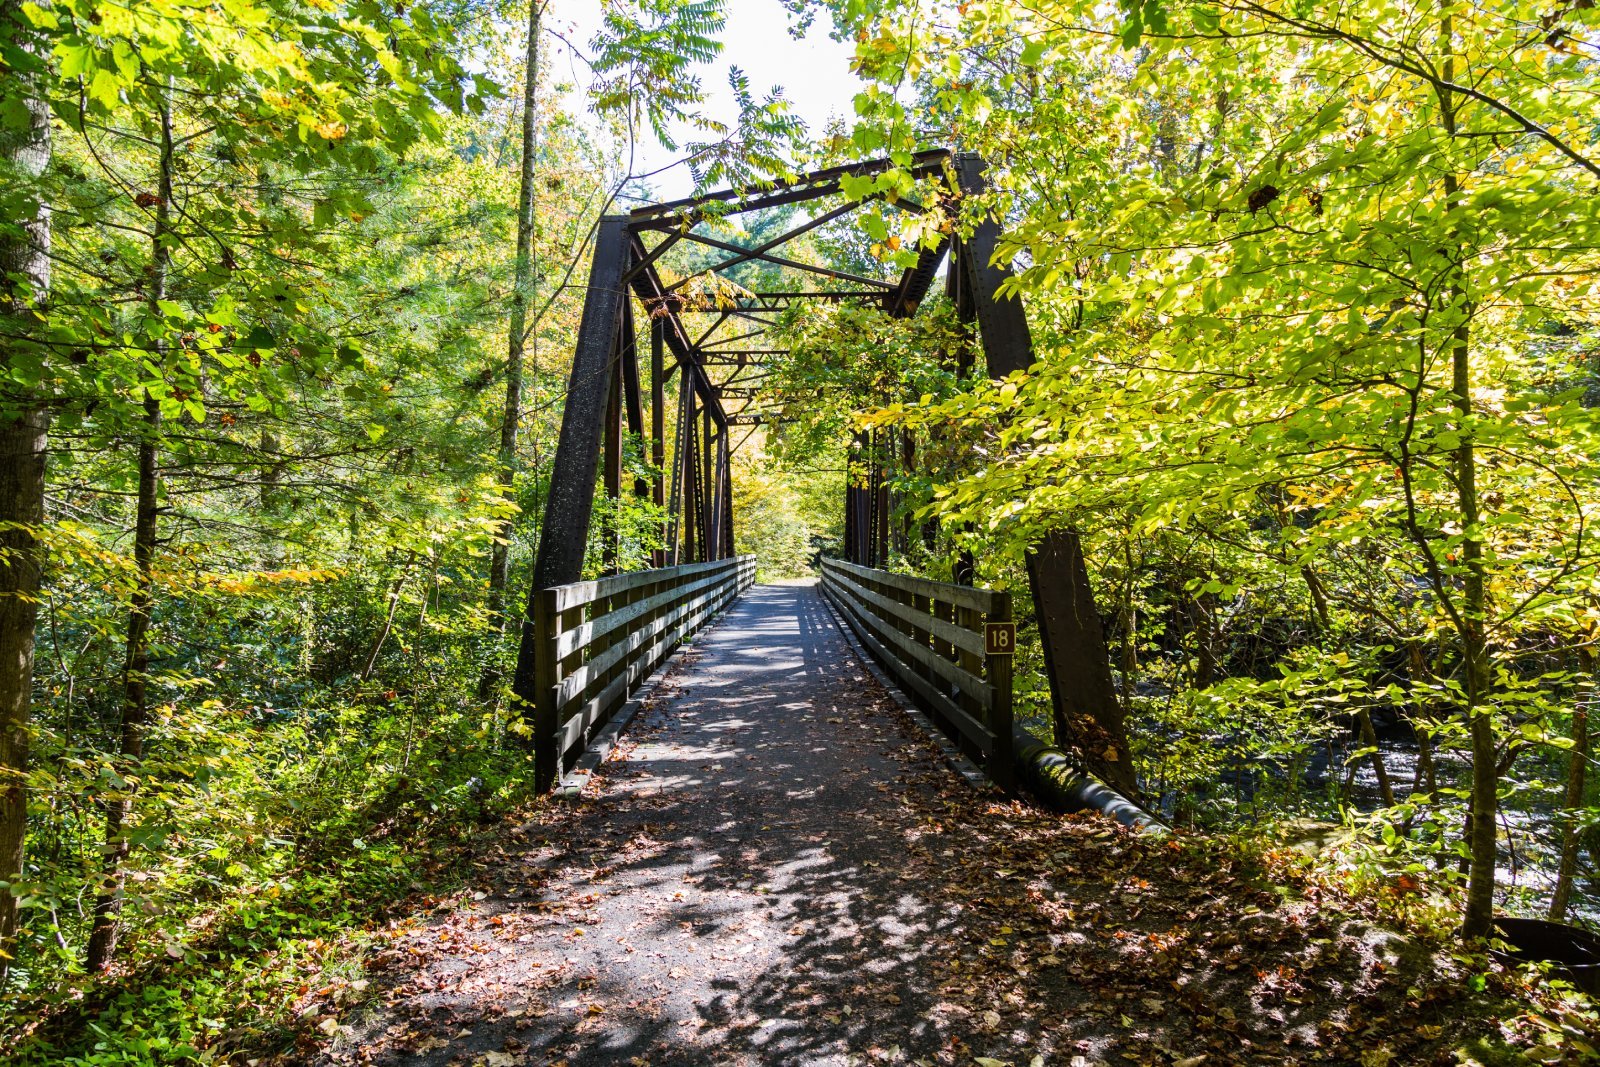 Image Credit: Shutterstock / FotoKina <p>Historic Abingdon is known for its arts scene and the Virginia Creeper Trail. Experience Appalachian culture without the hustle of more crowded mountain towns.</p>